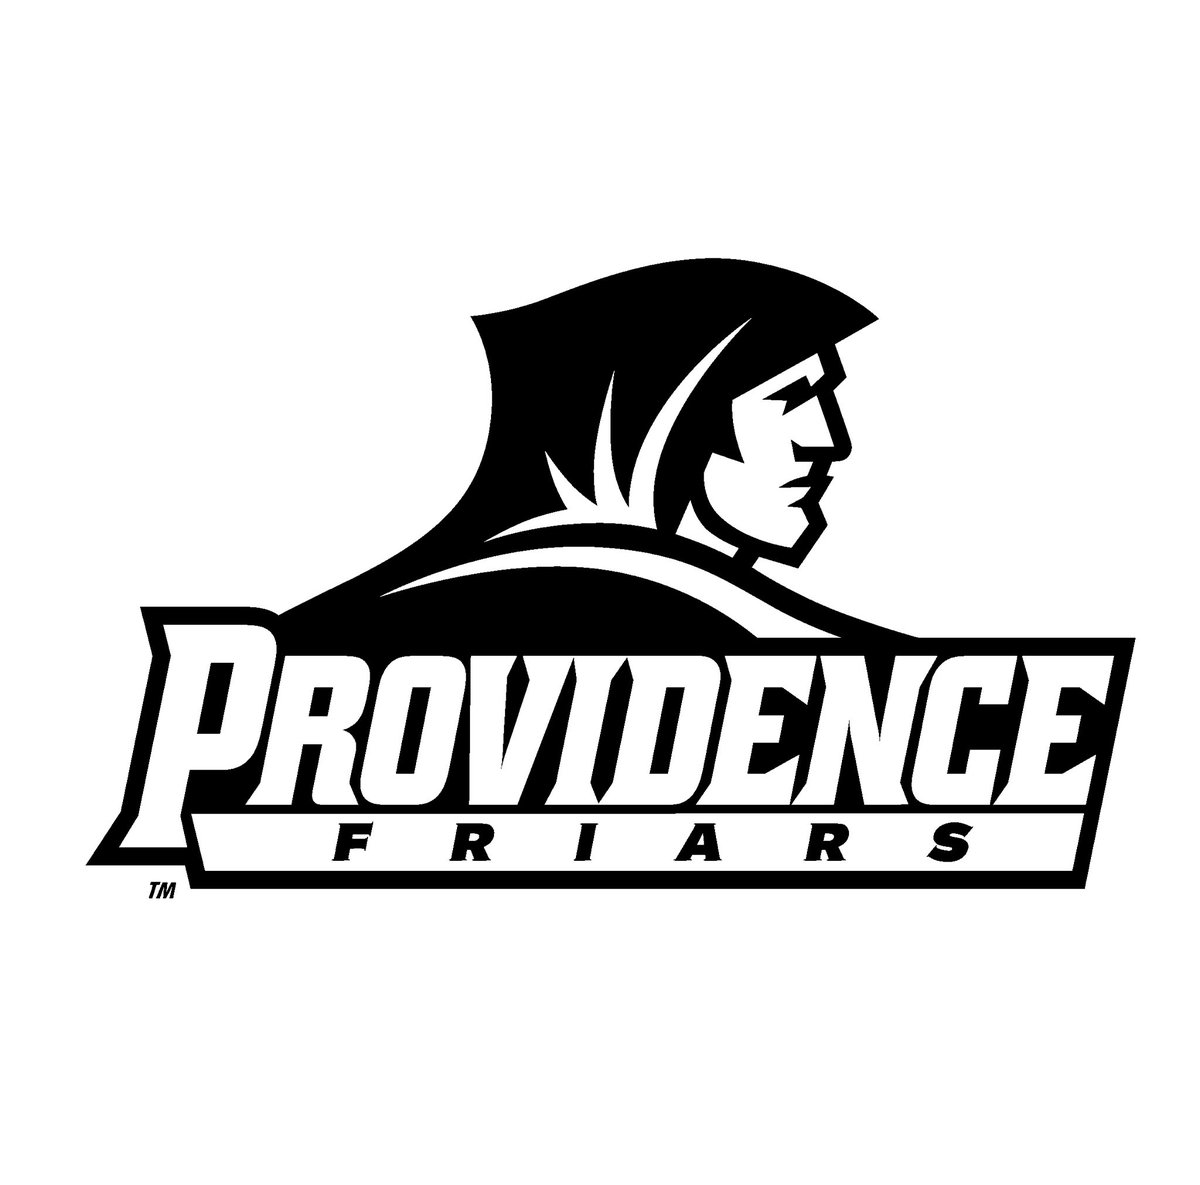 After a great talk with Coach English, I am blessed to receive a scholarship from providence college